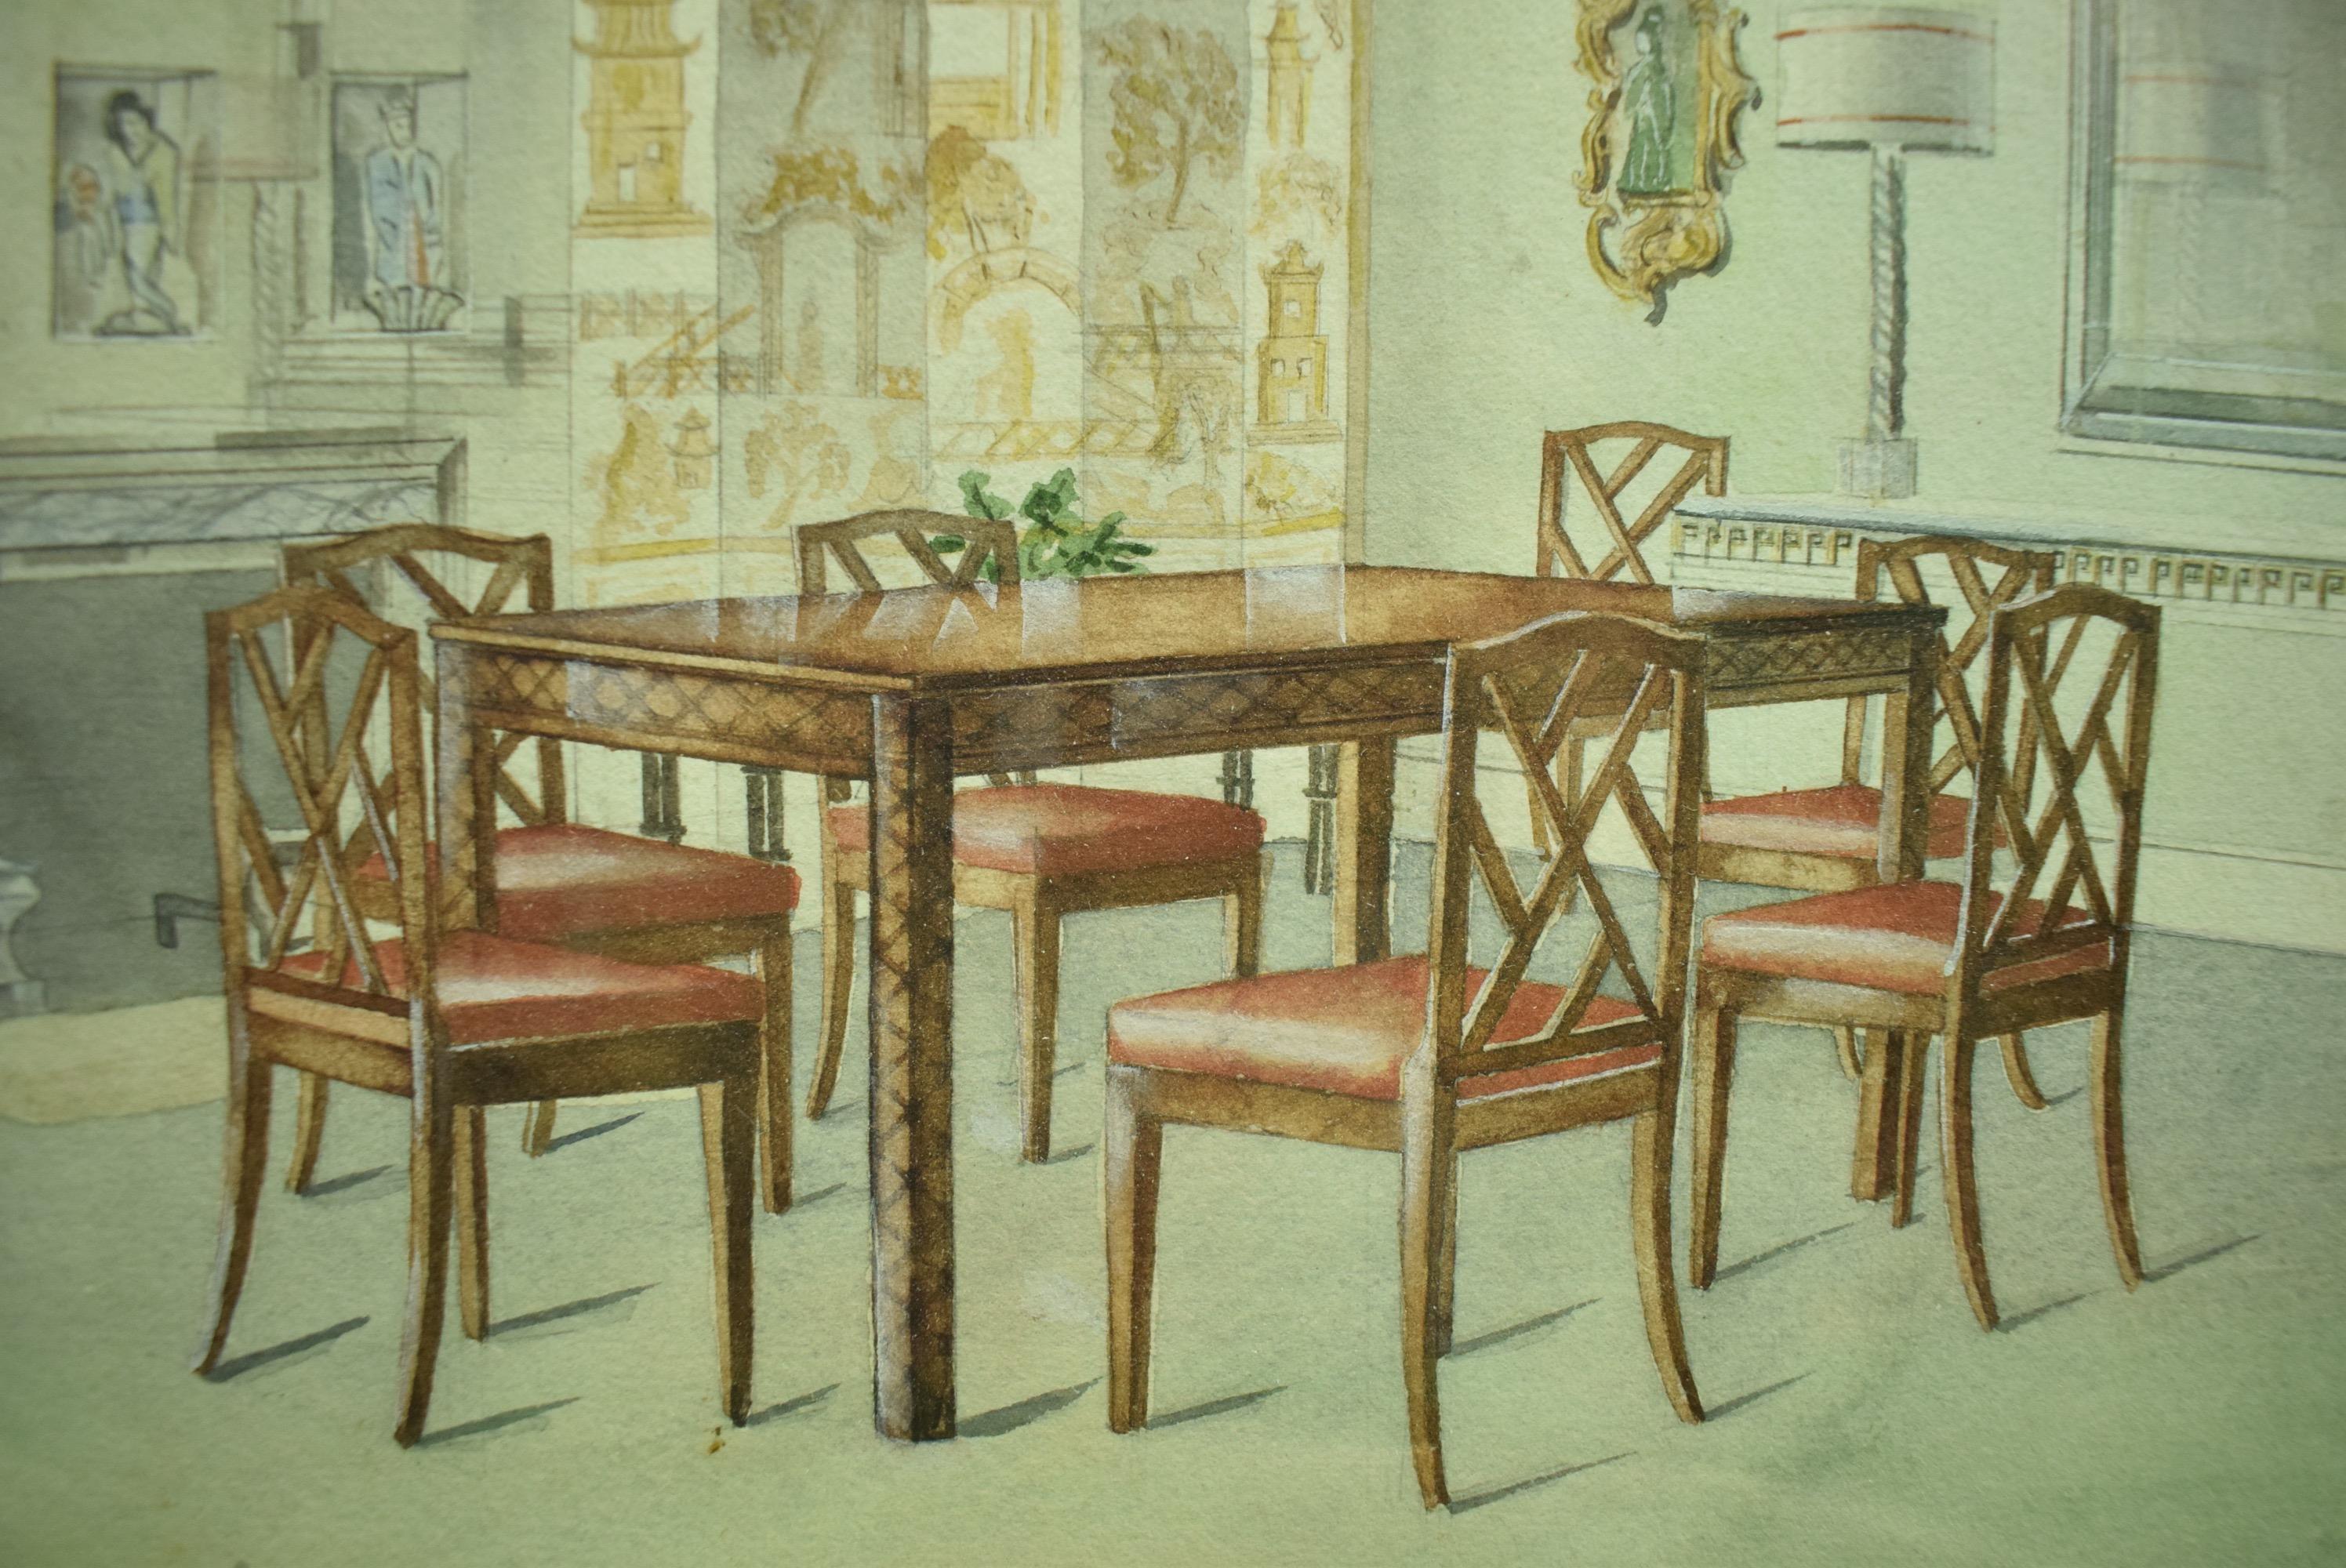 Chinoiserie Dining Room - Other Art Style Art by Unknown